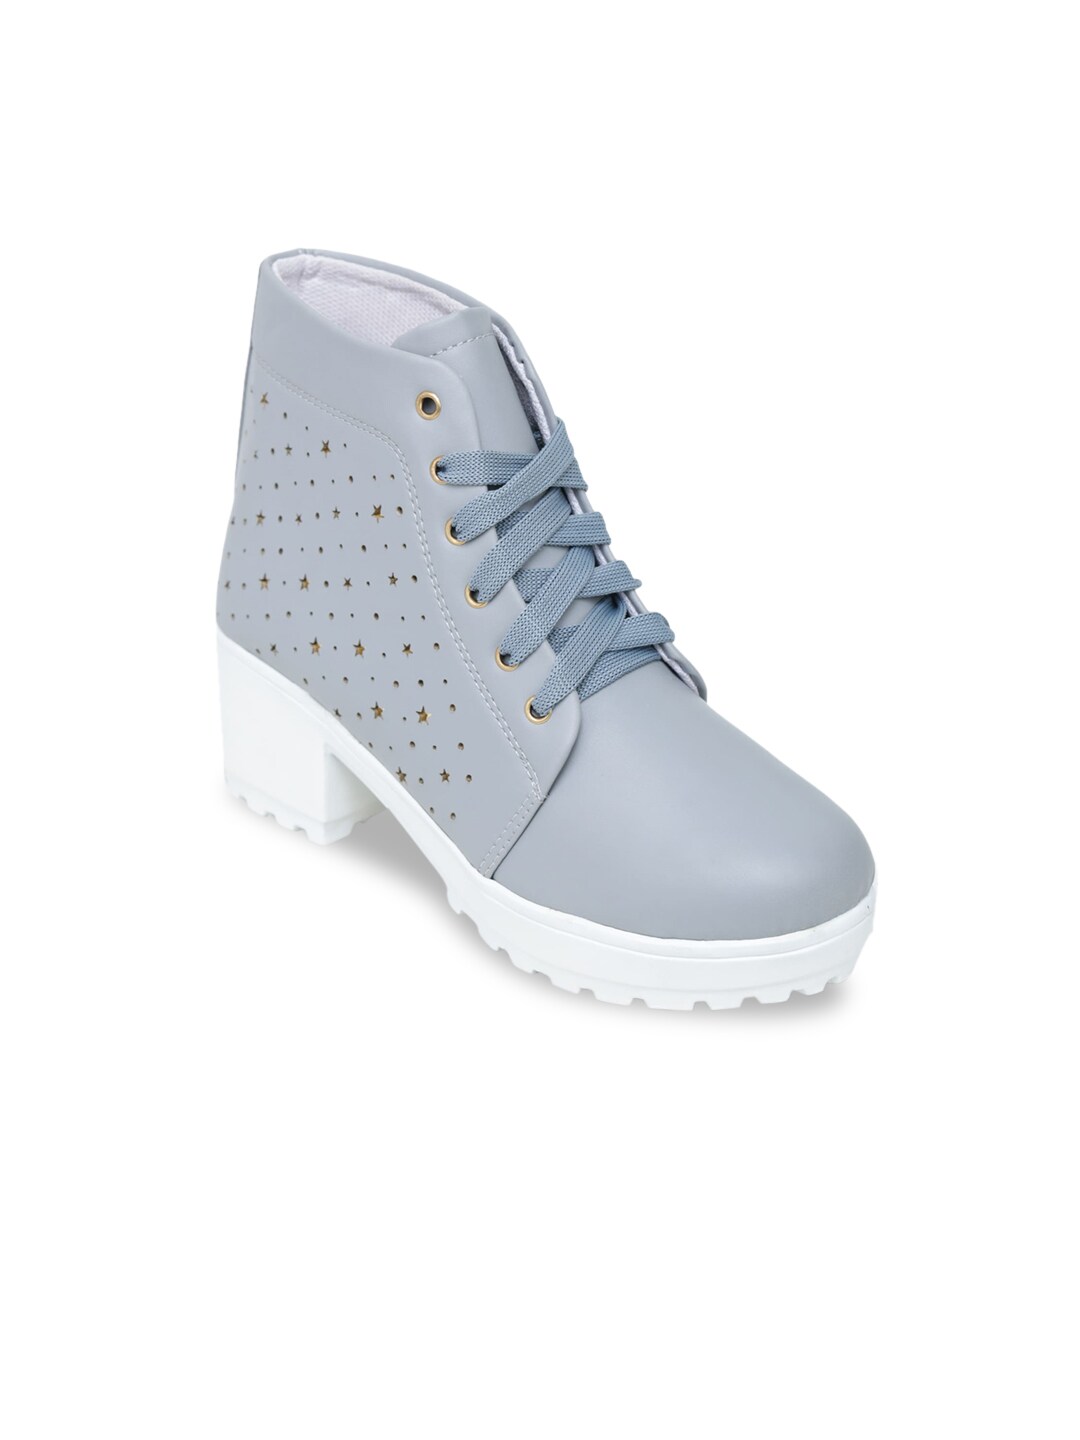 LONDON STEPS Women Grey & White Embellished Heeled Boots Price in India